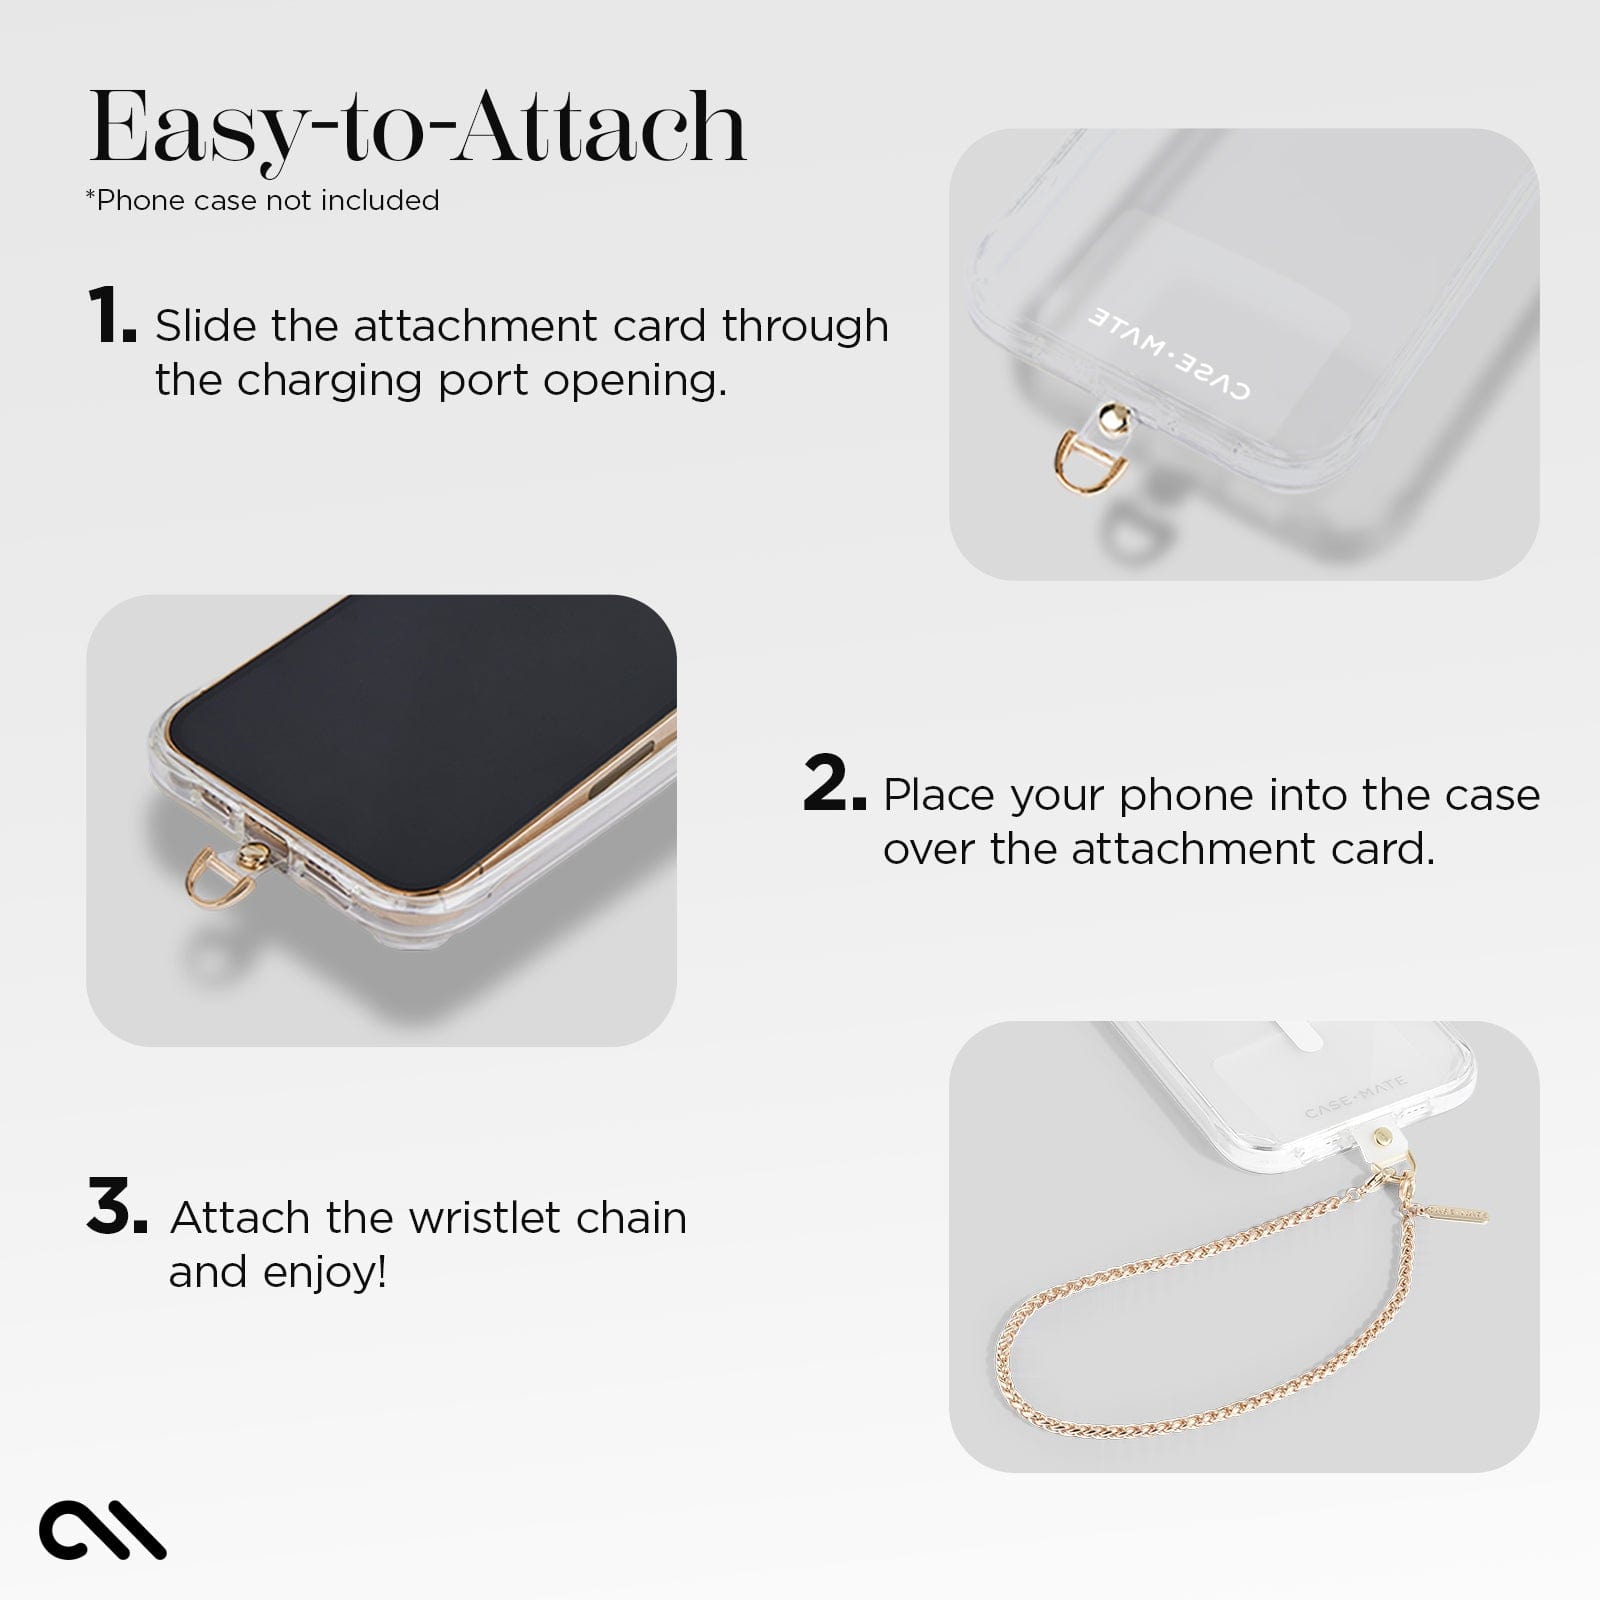 EASY-TO-ATTACH. 1. SLIDE THE ATTACHMENT CARD THROUGH THE CHARGING PORT OPENING. 2. PLACE YOUR PHONE INTO THE CASE OVER THE ATTACHMENT CARD. 3. ATTACH THE WRISTLET CHAIN AND ENJOY